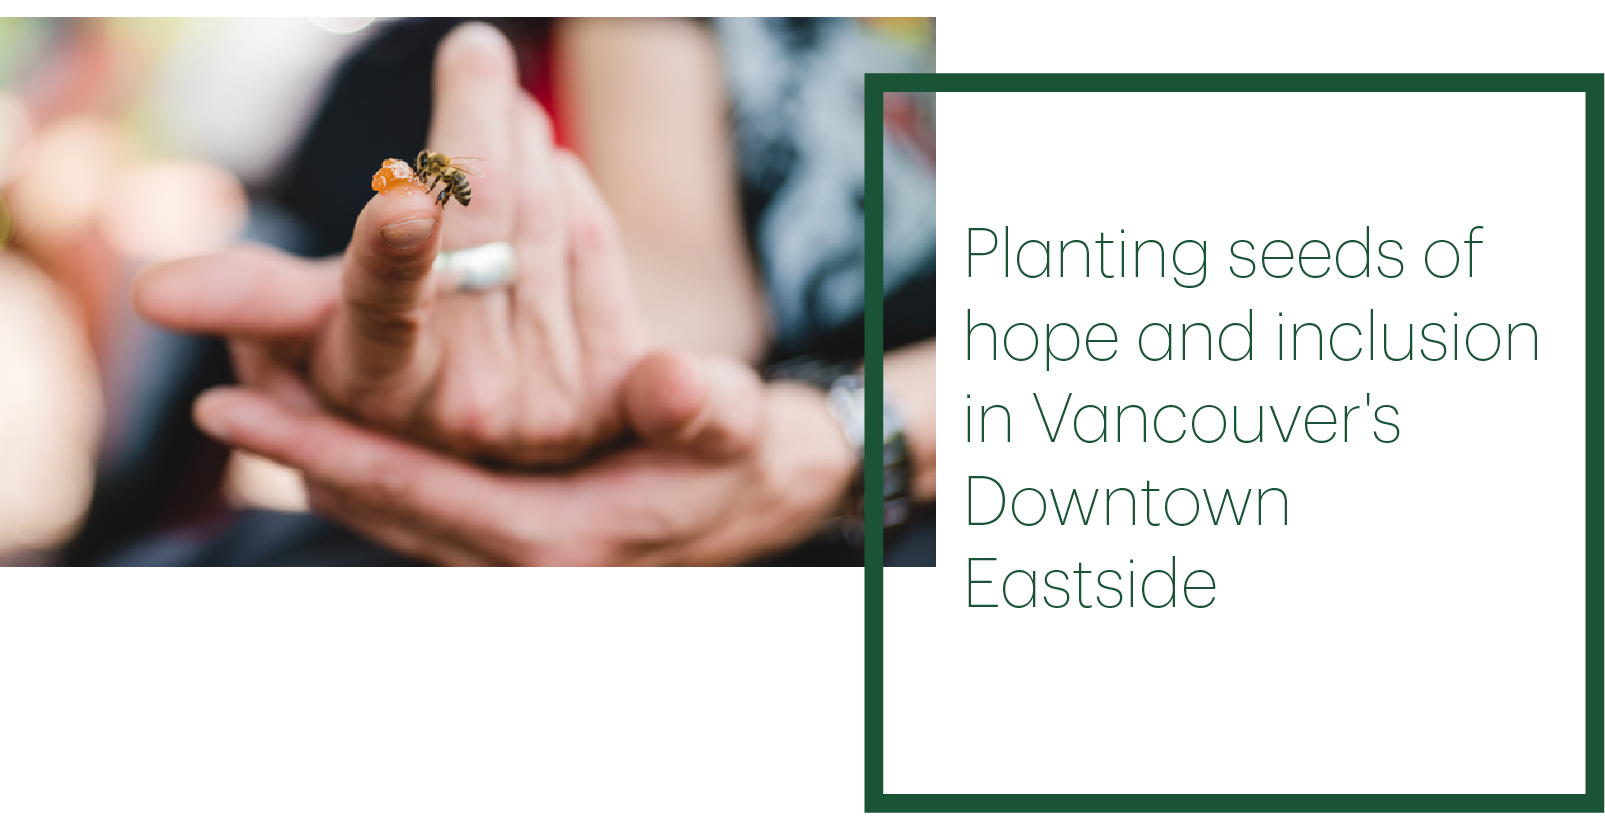 Links off to story Planting seeds of hope and inclusion in Vancouver's Downtown Eastside